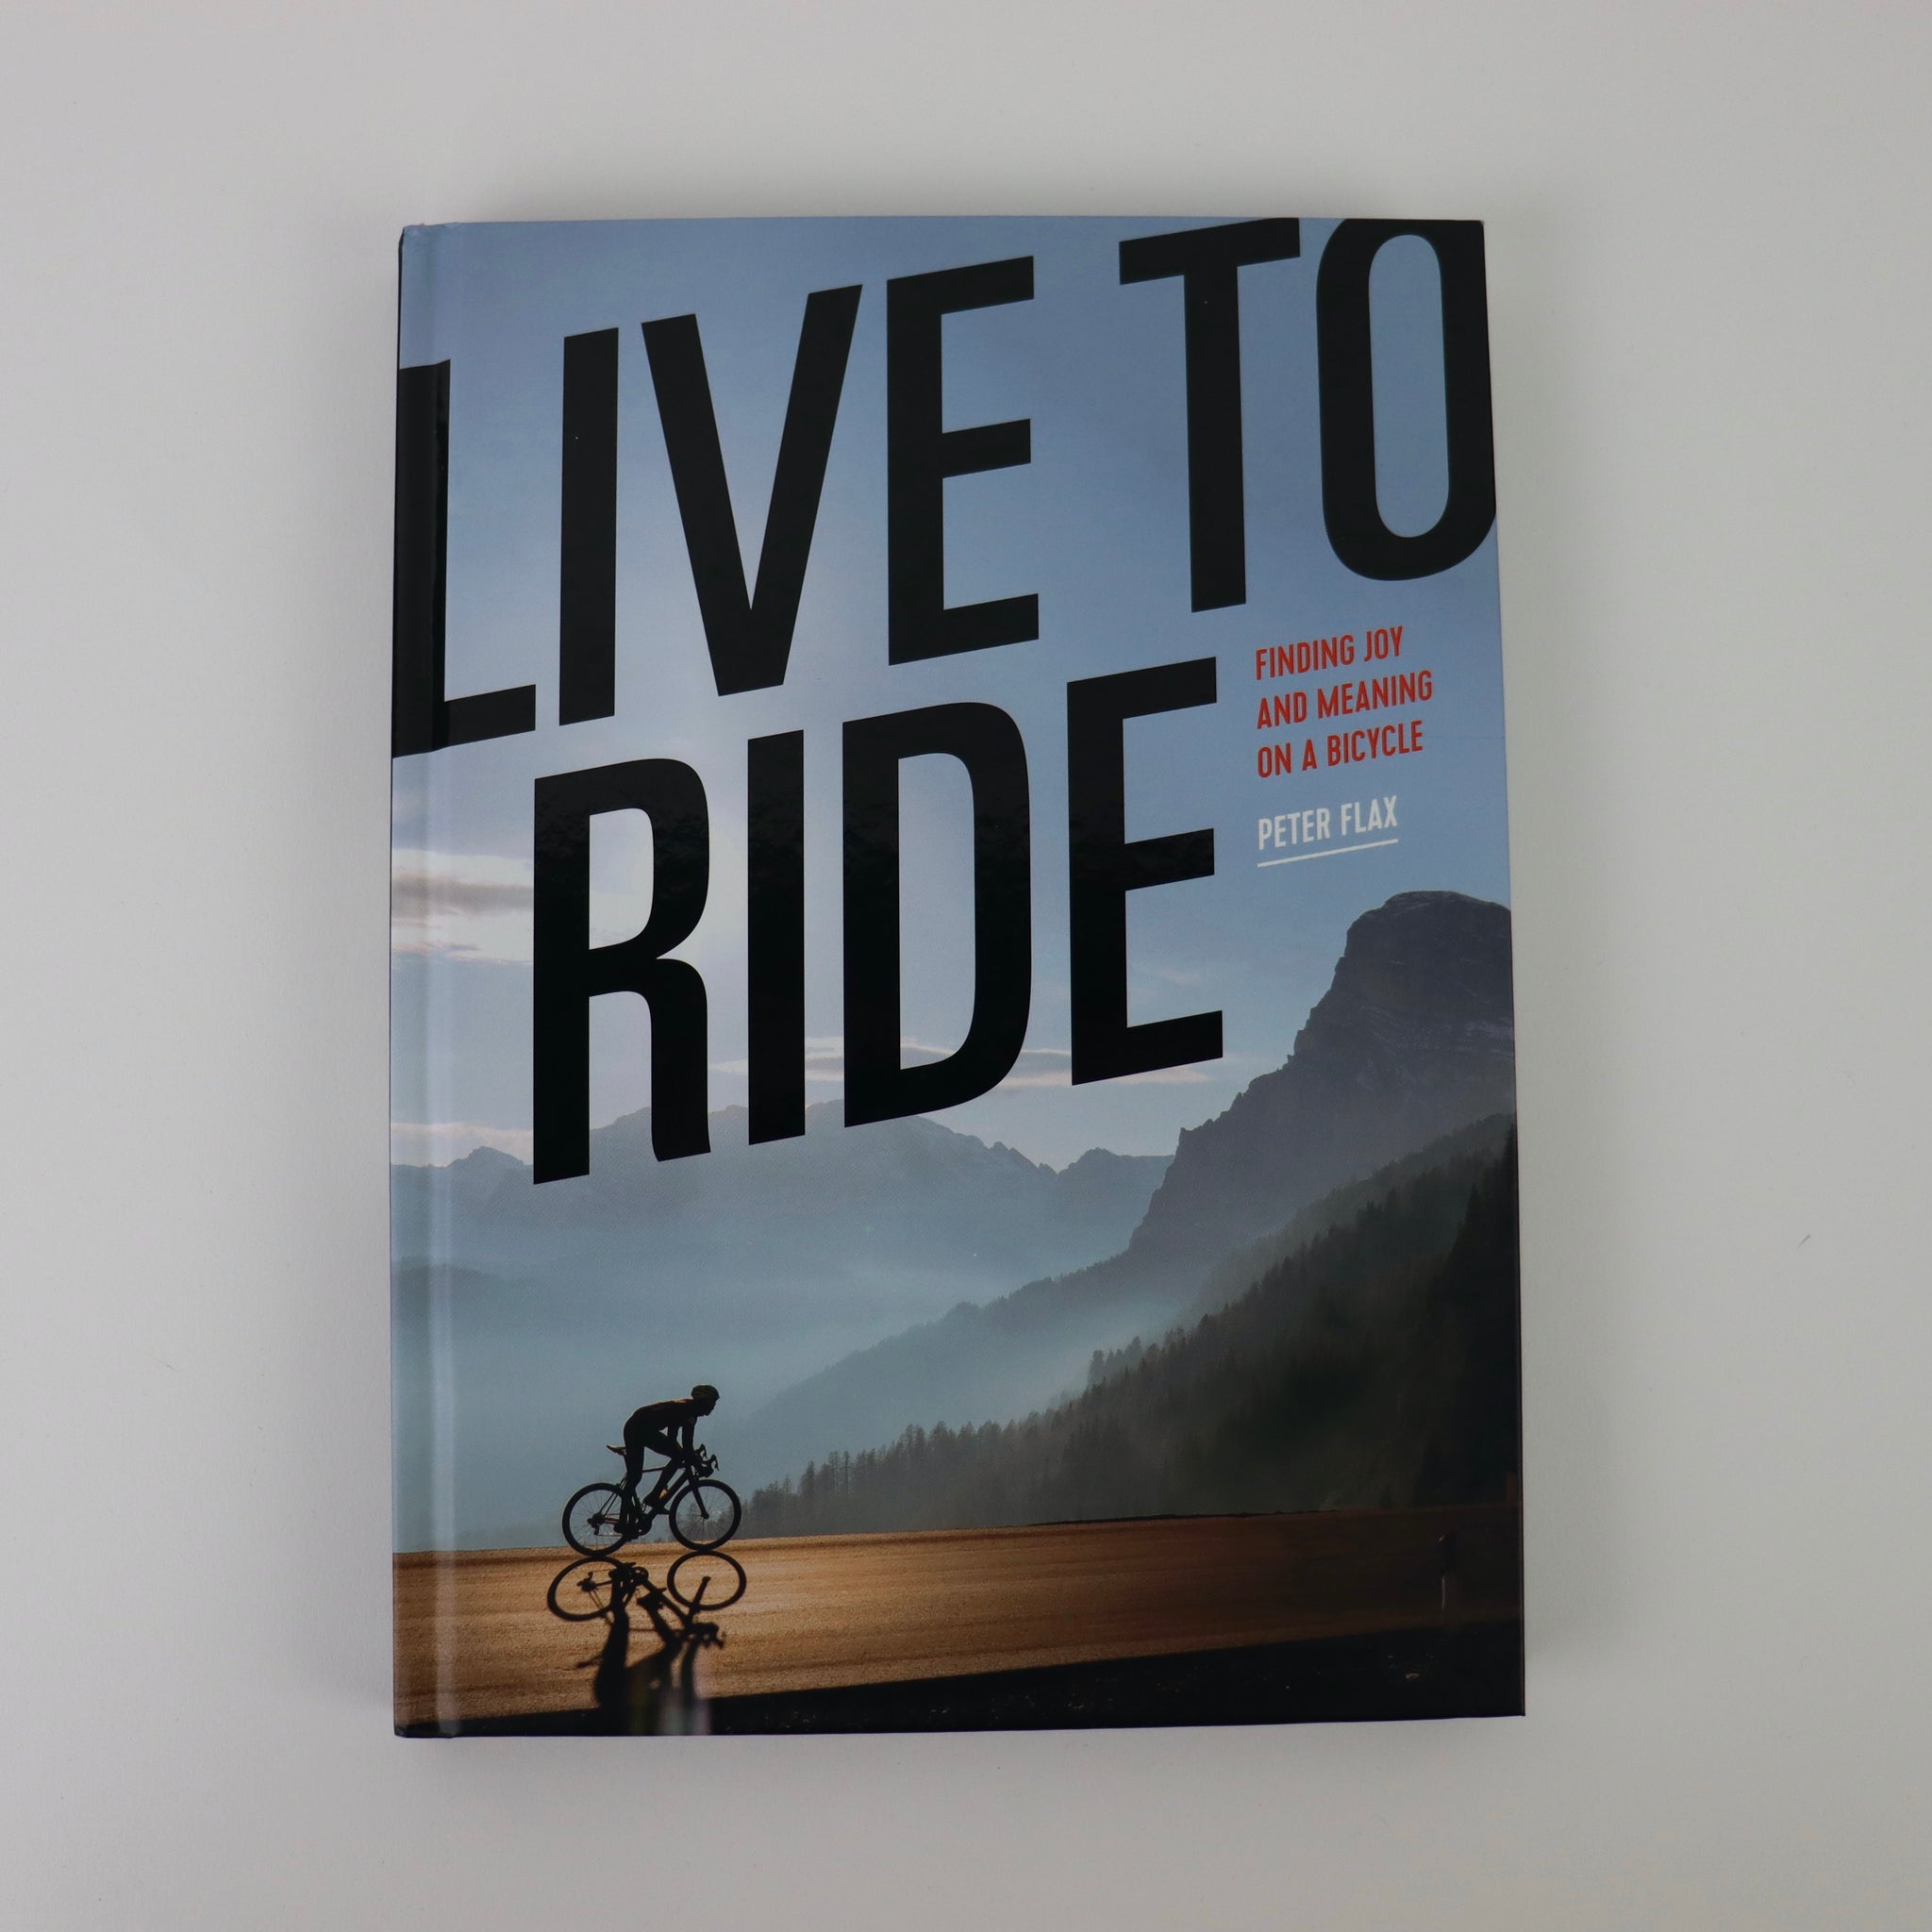 Live To Ride by Peter Flax